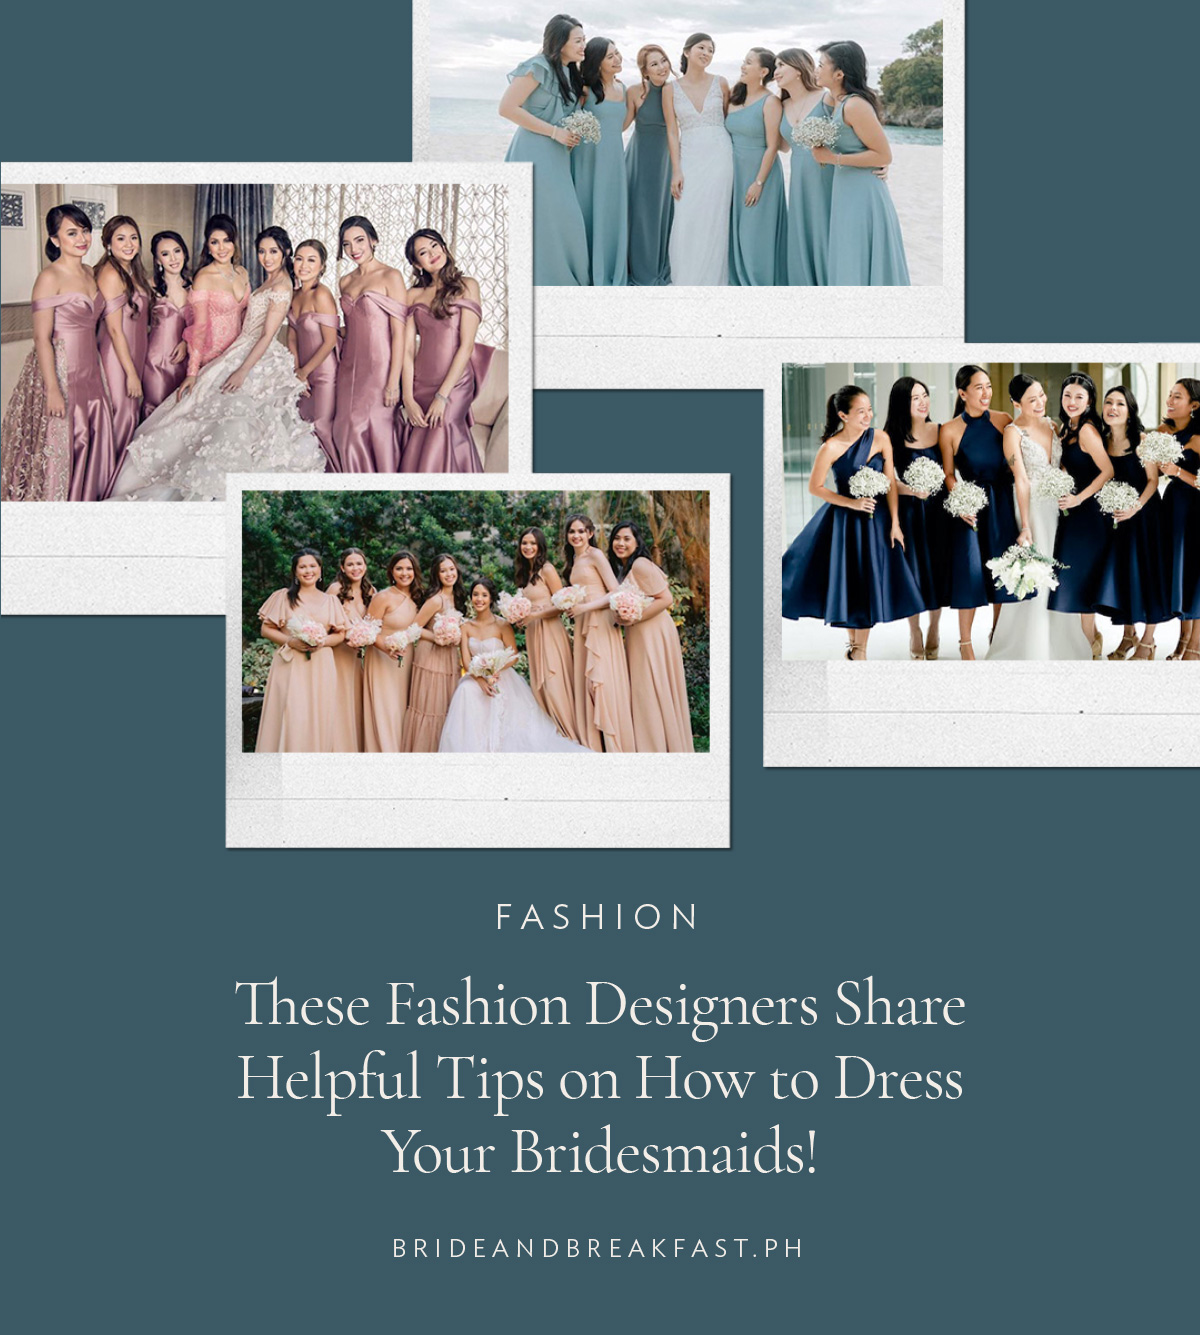 These Fashion Designers Share Helpful Tips on How to Dress Your Bridesmaids!